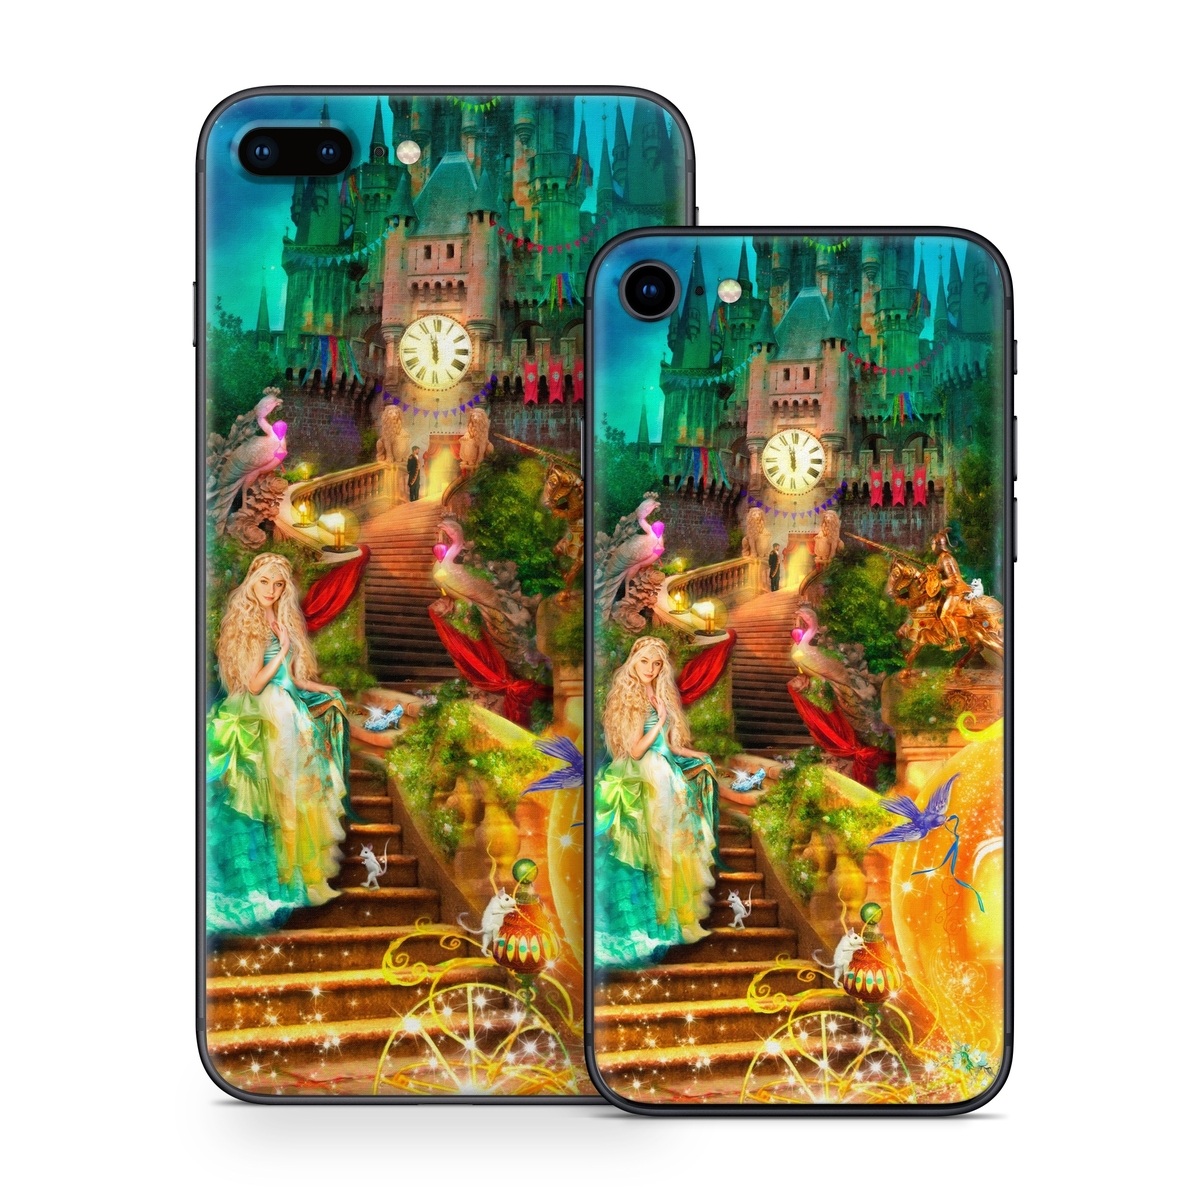 iPhone 8 Series Skin design of Mythology, Adventure game, World, Fictional character, Theatrical scenery, Art, with yellow, orange, blue, green, red, purple, white, black colors